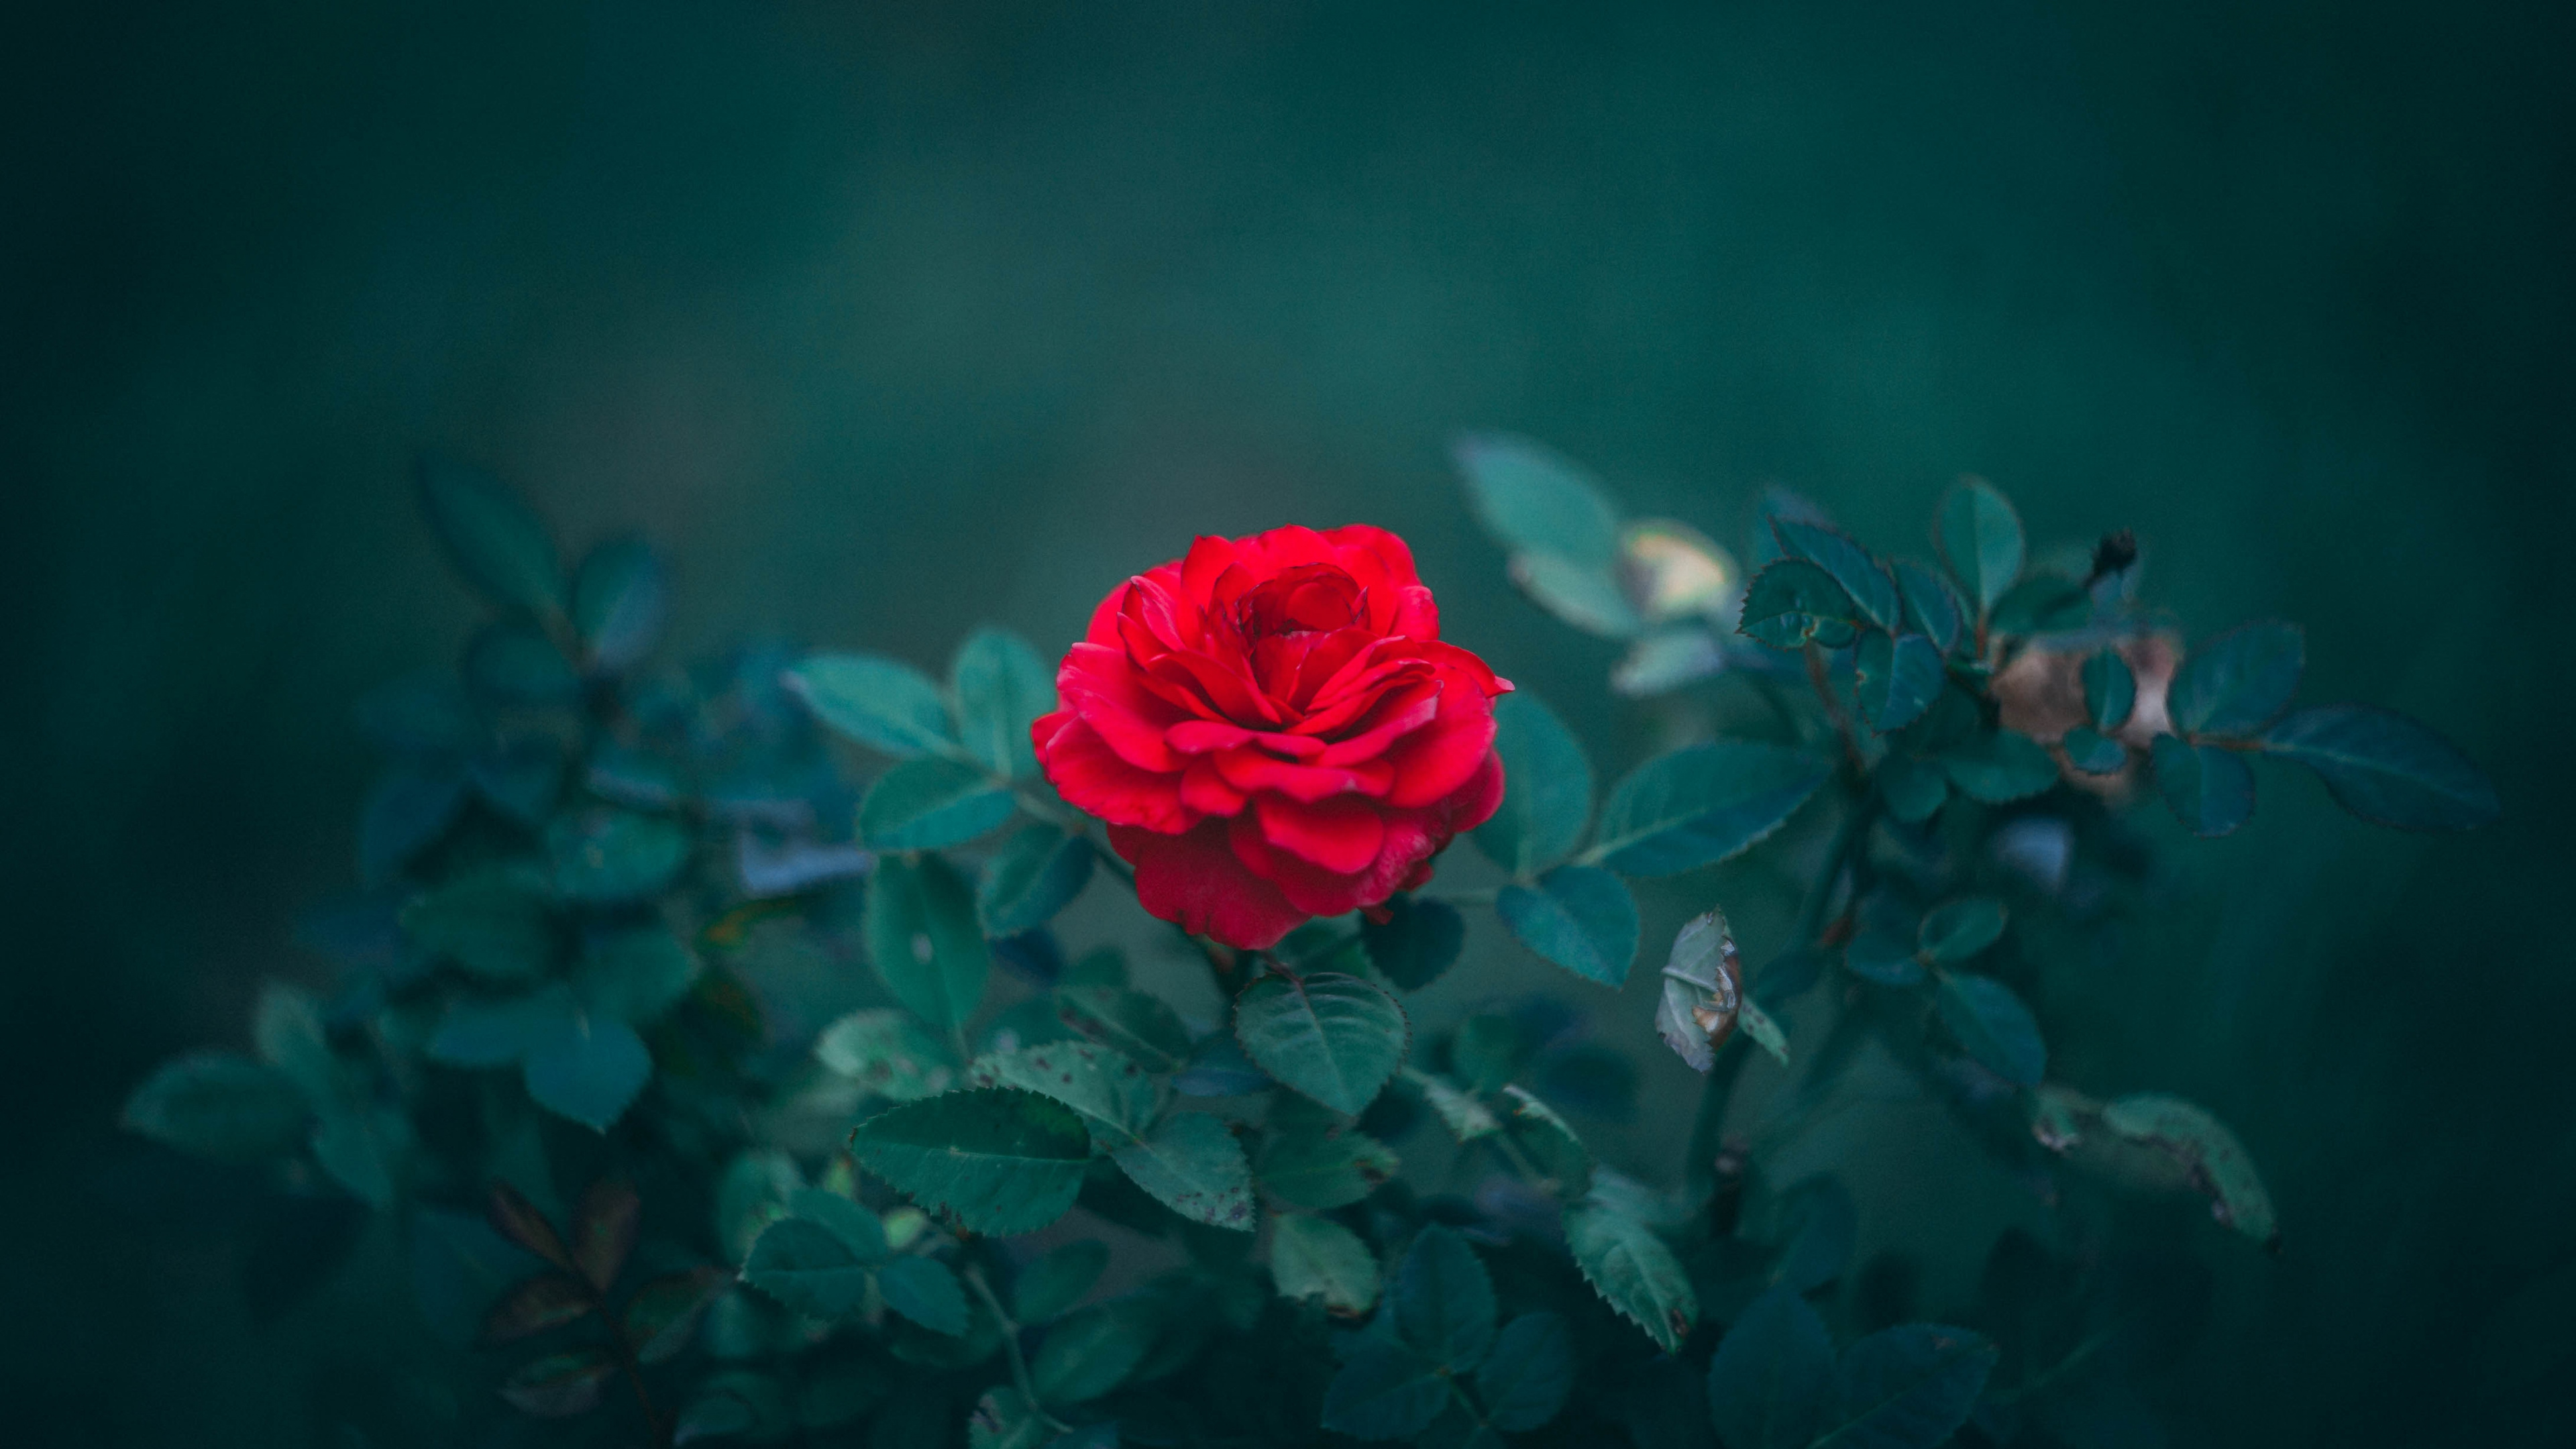 Red Rose in Bloom During Daytime. Wallpaper in 3840x2160 Resolution